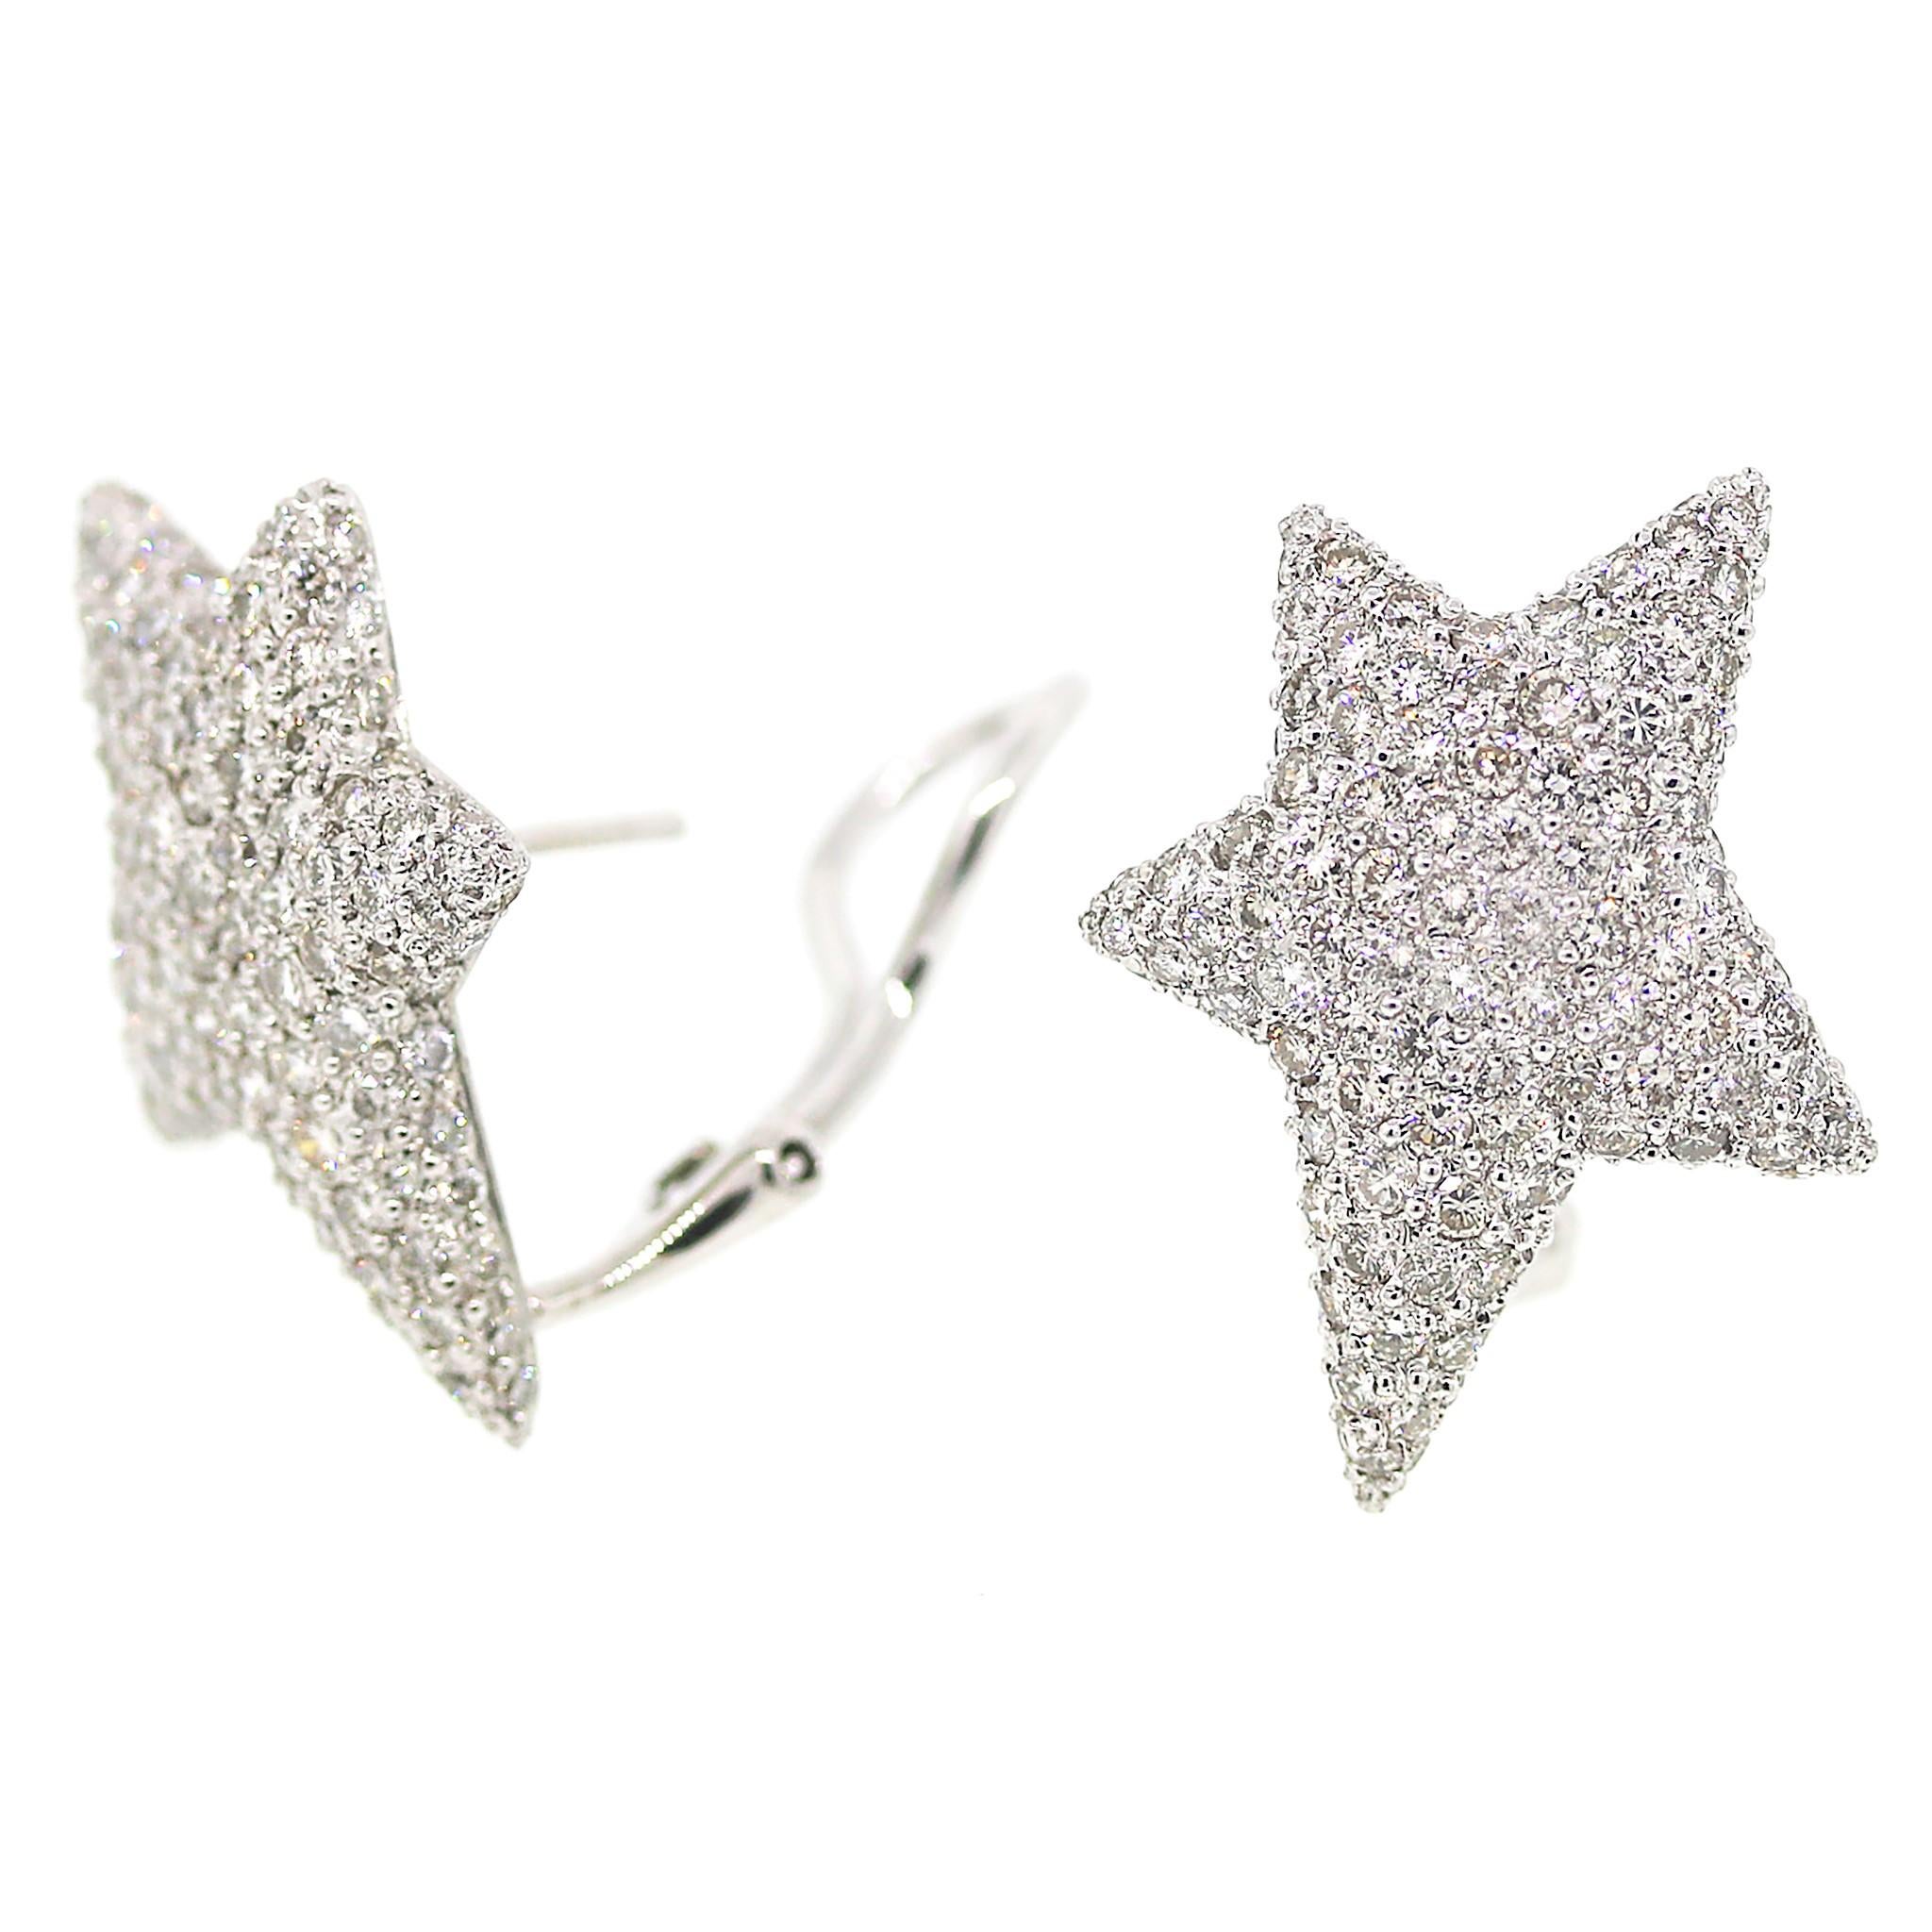 3.32 carat Diamond Shooting Star Earrings in Platinum In Good Condition For Sale In New York, NY